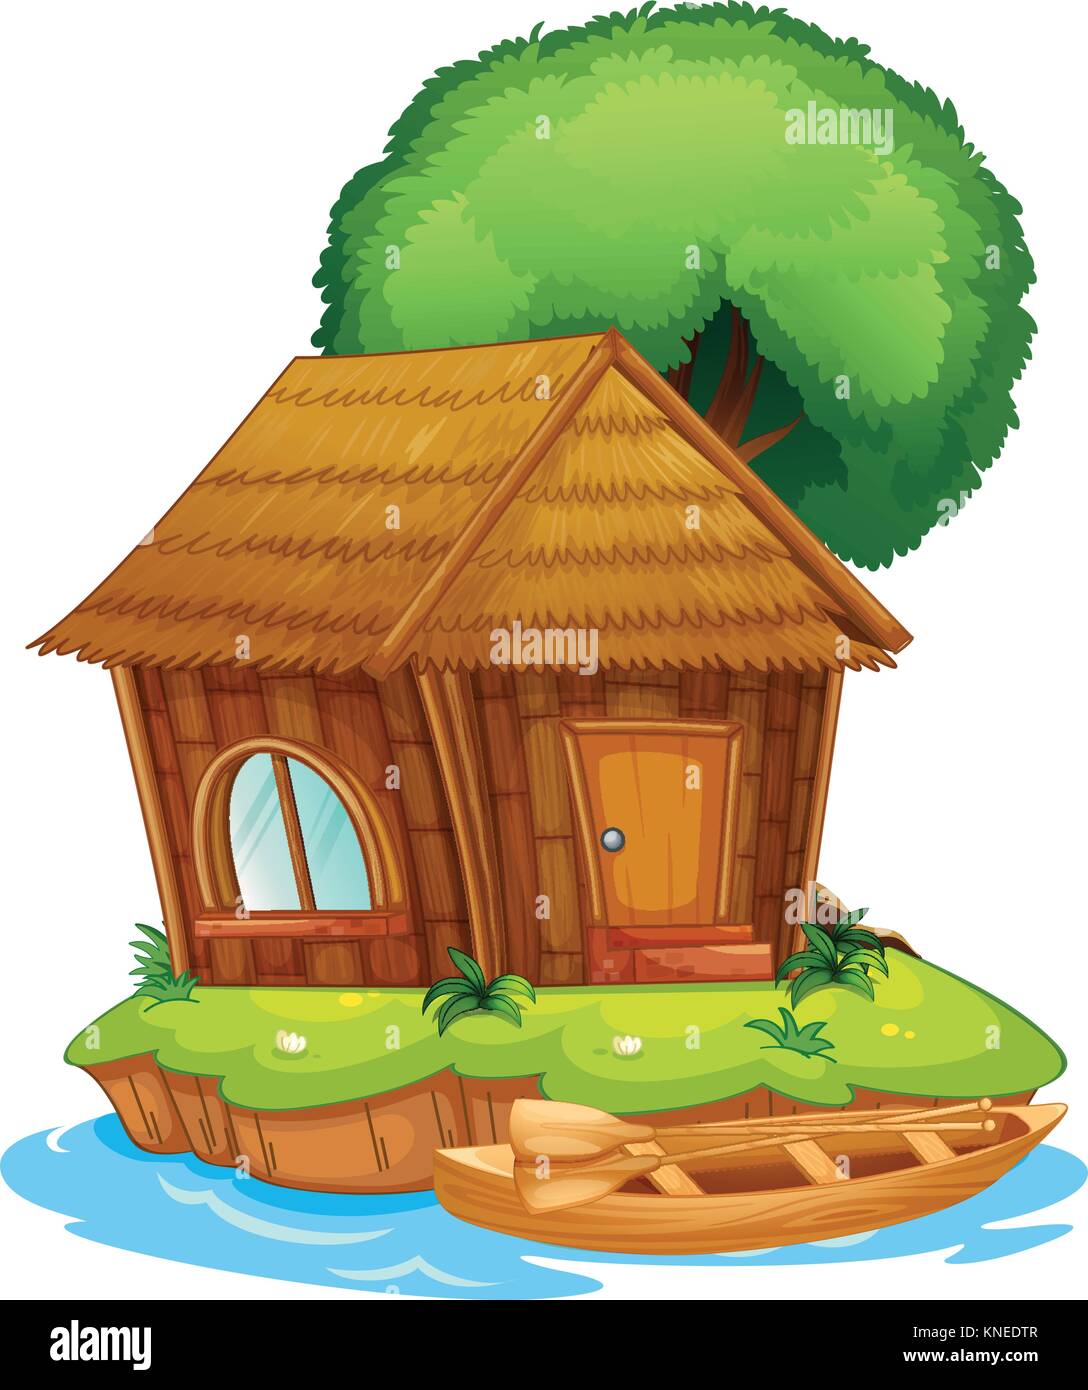 Illustration of a house on an island together with a tree and a canoe Stock Vector